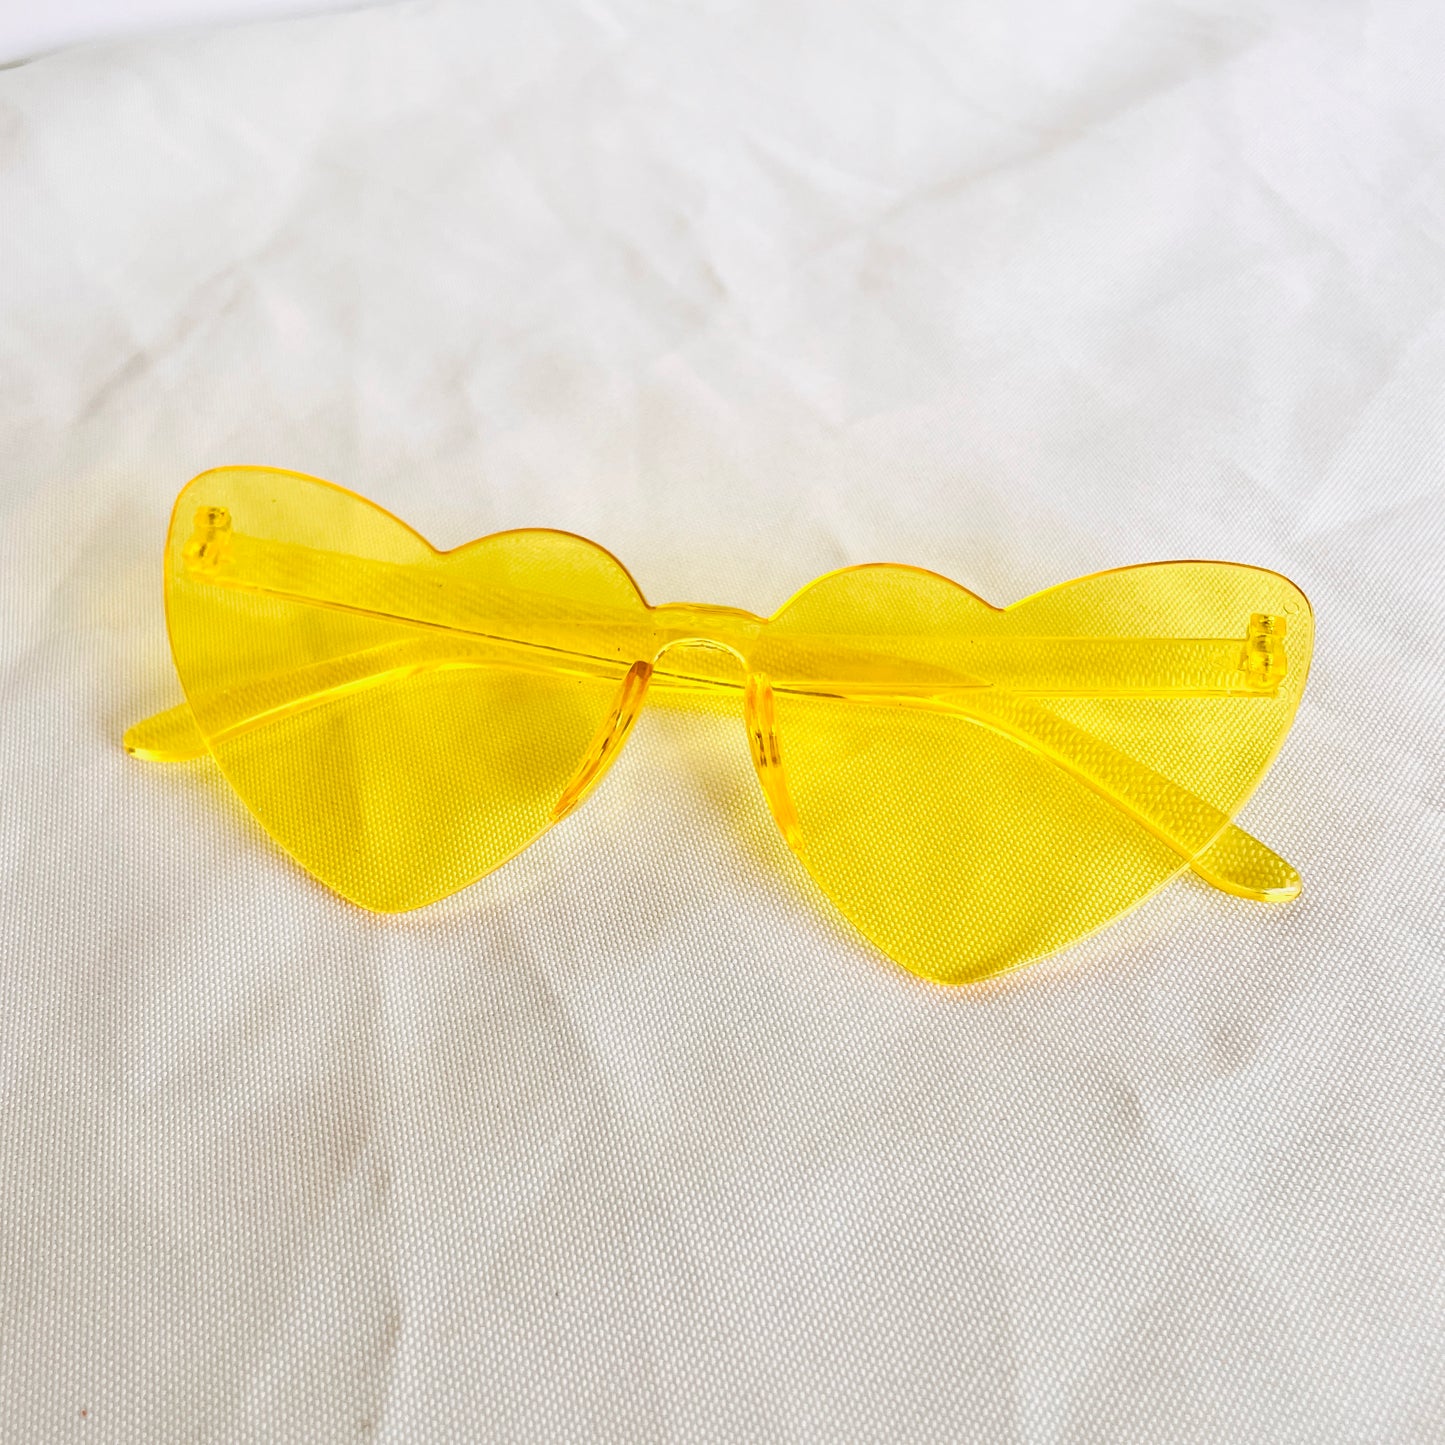 Yellow Clear Heart Adult Sunglasses - Las Ofrendas 